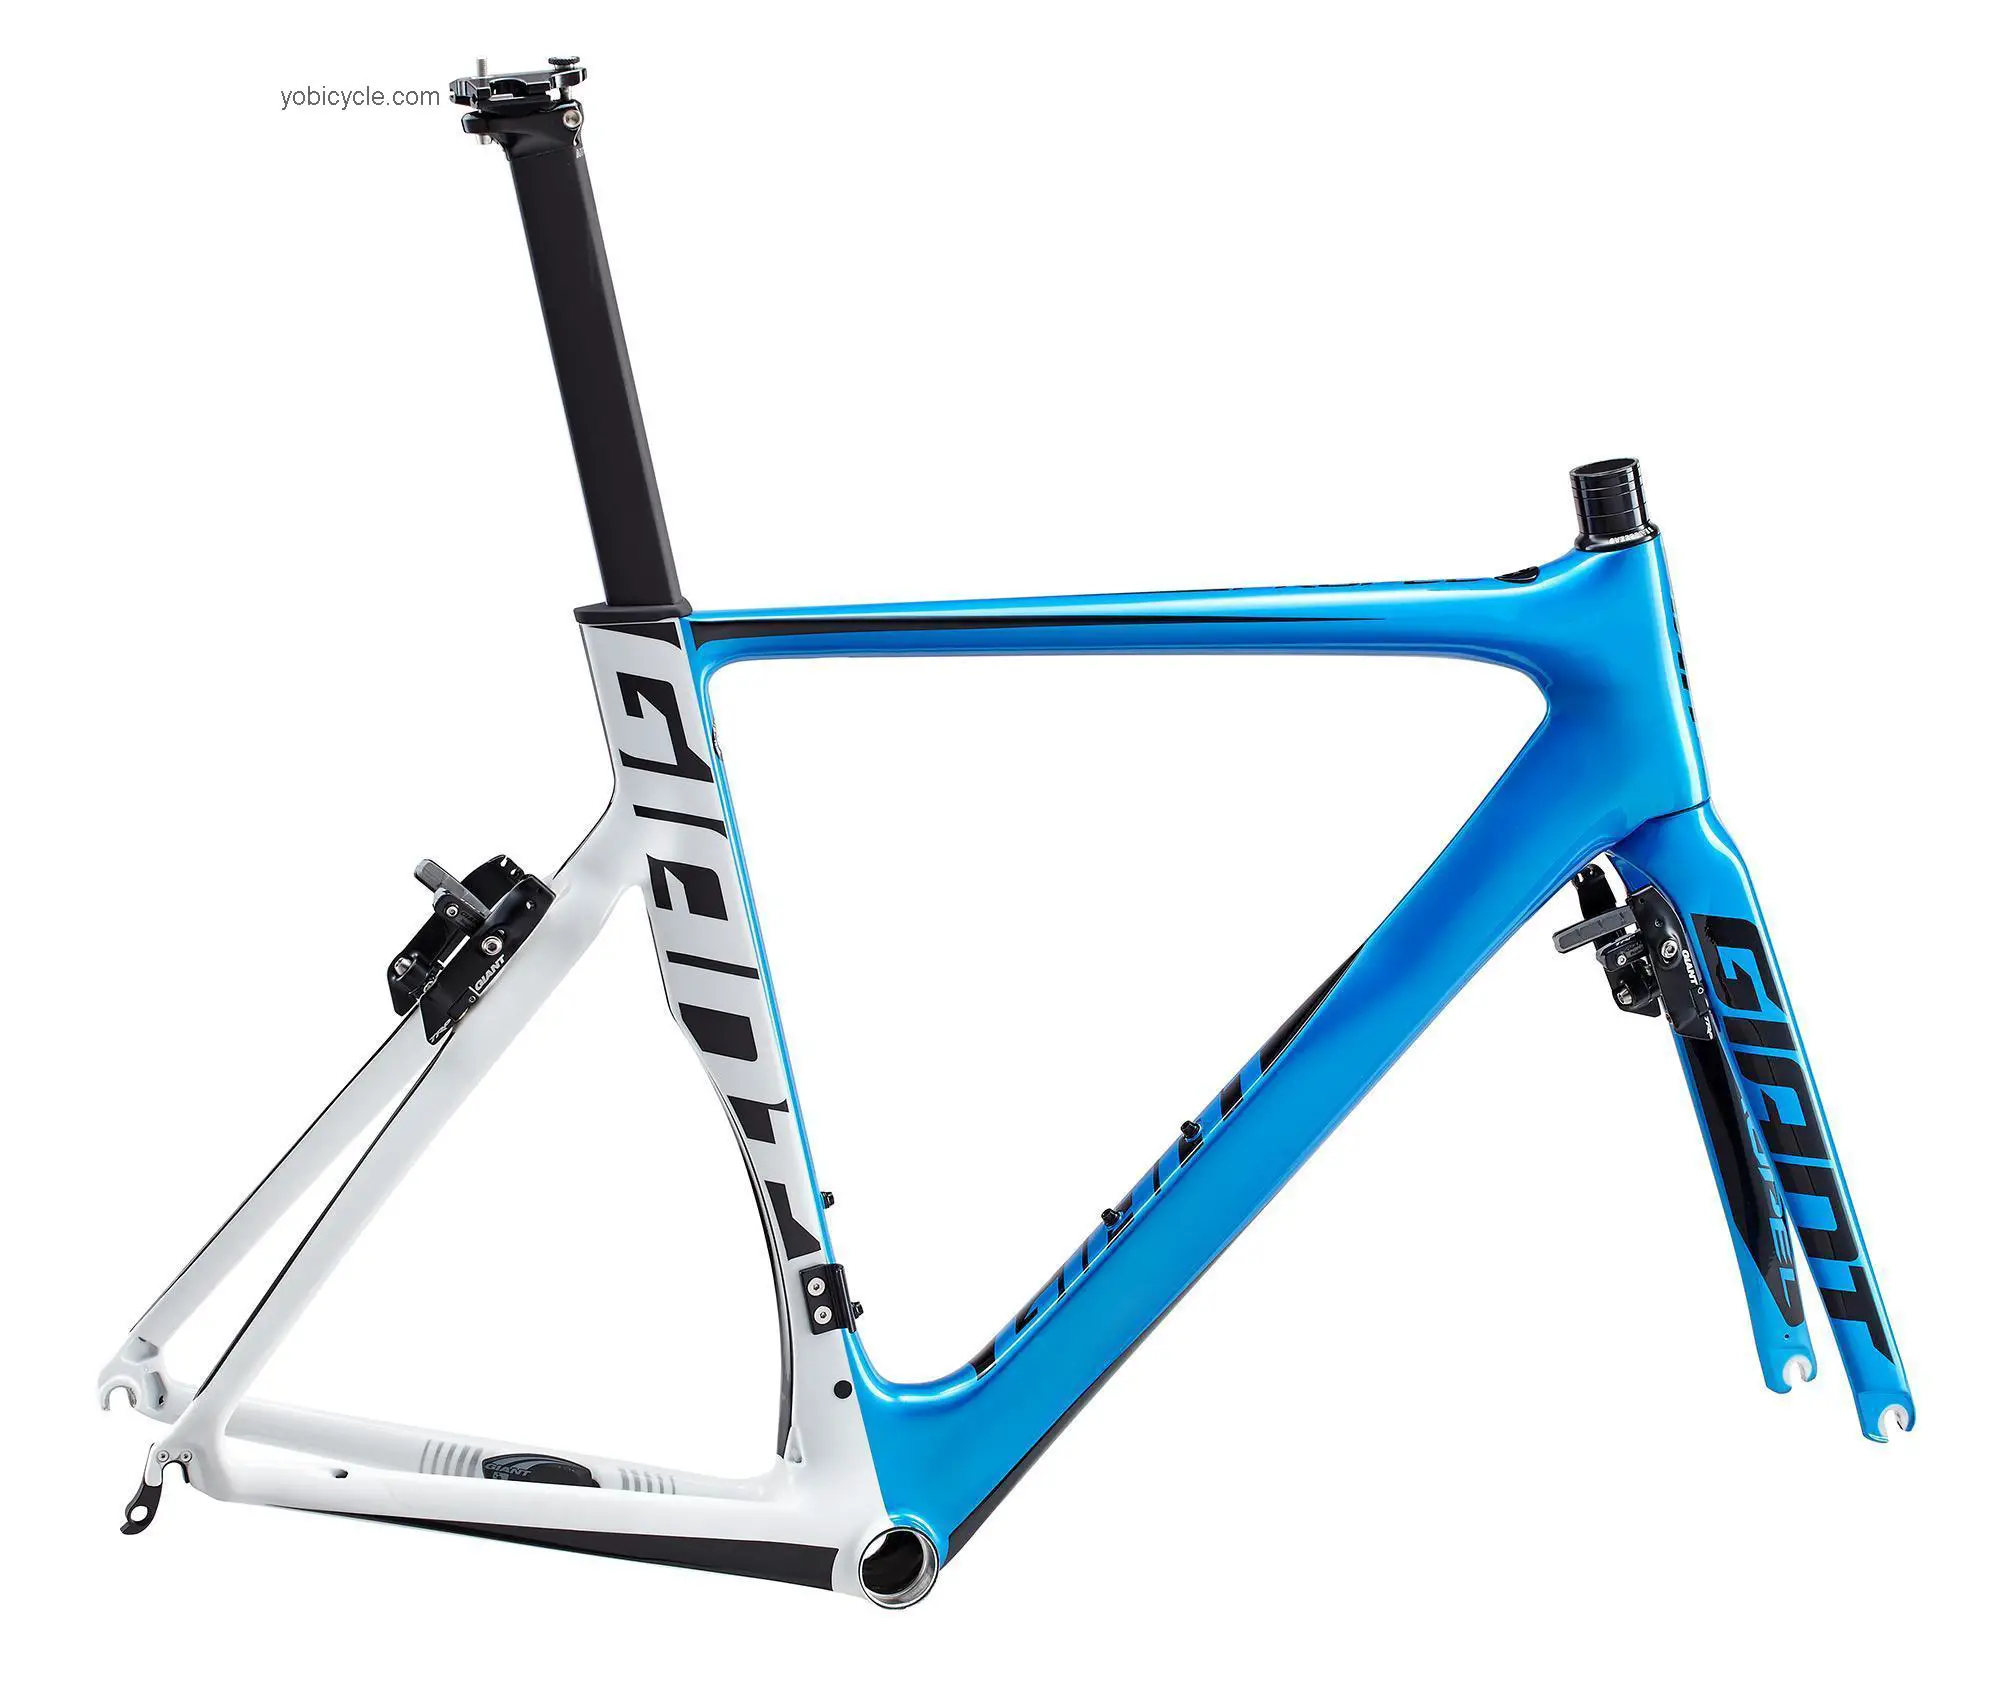 Giant Propel Advanced Pro Frameset 2015 comparison online with competitors